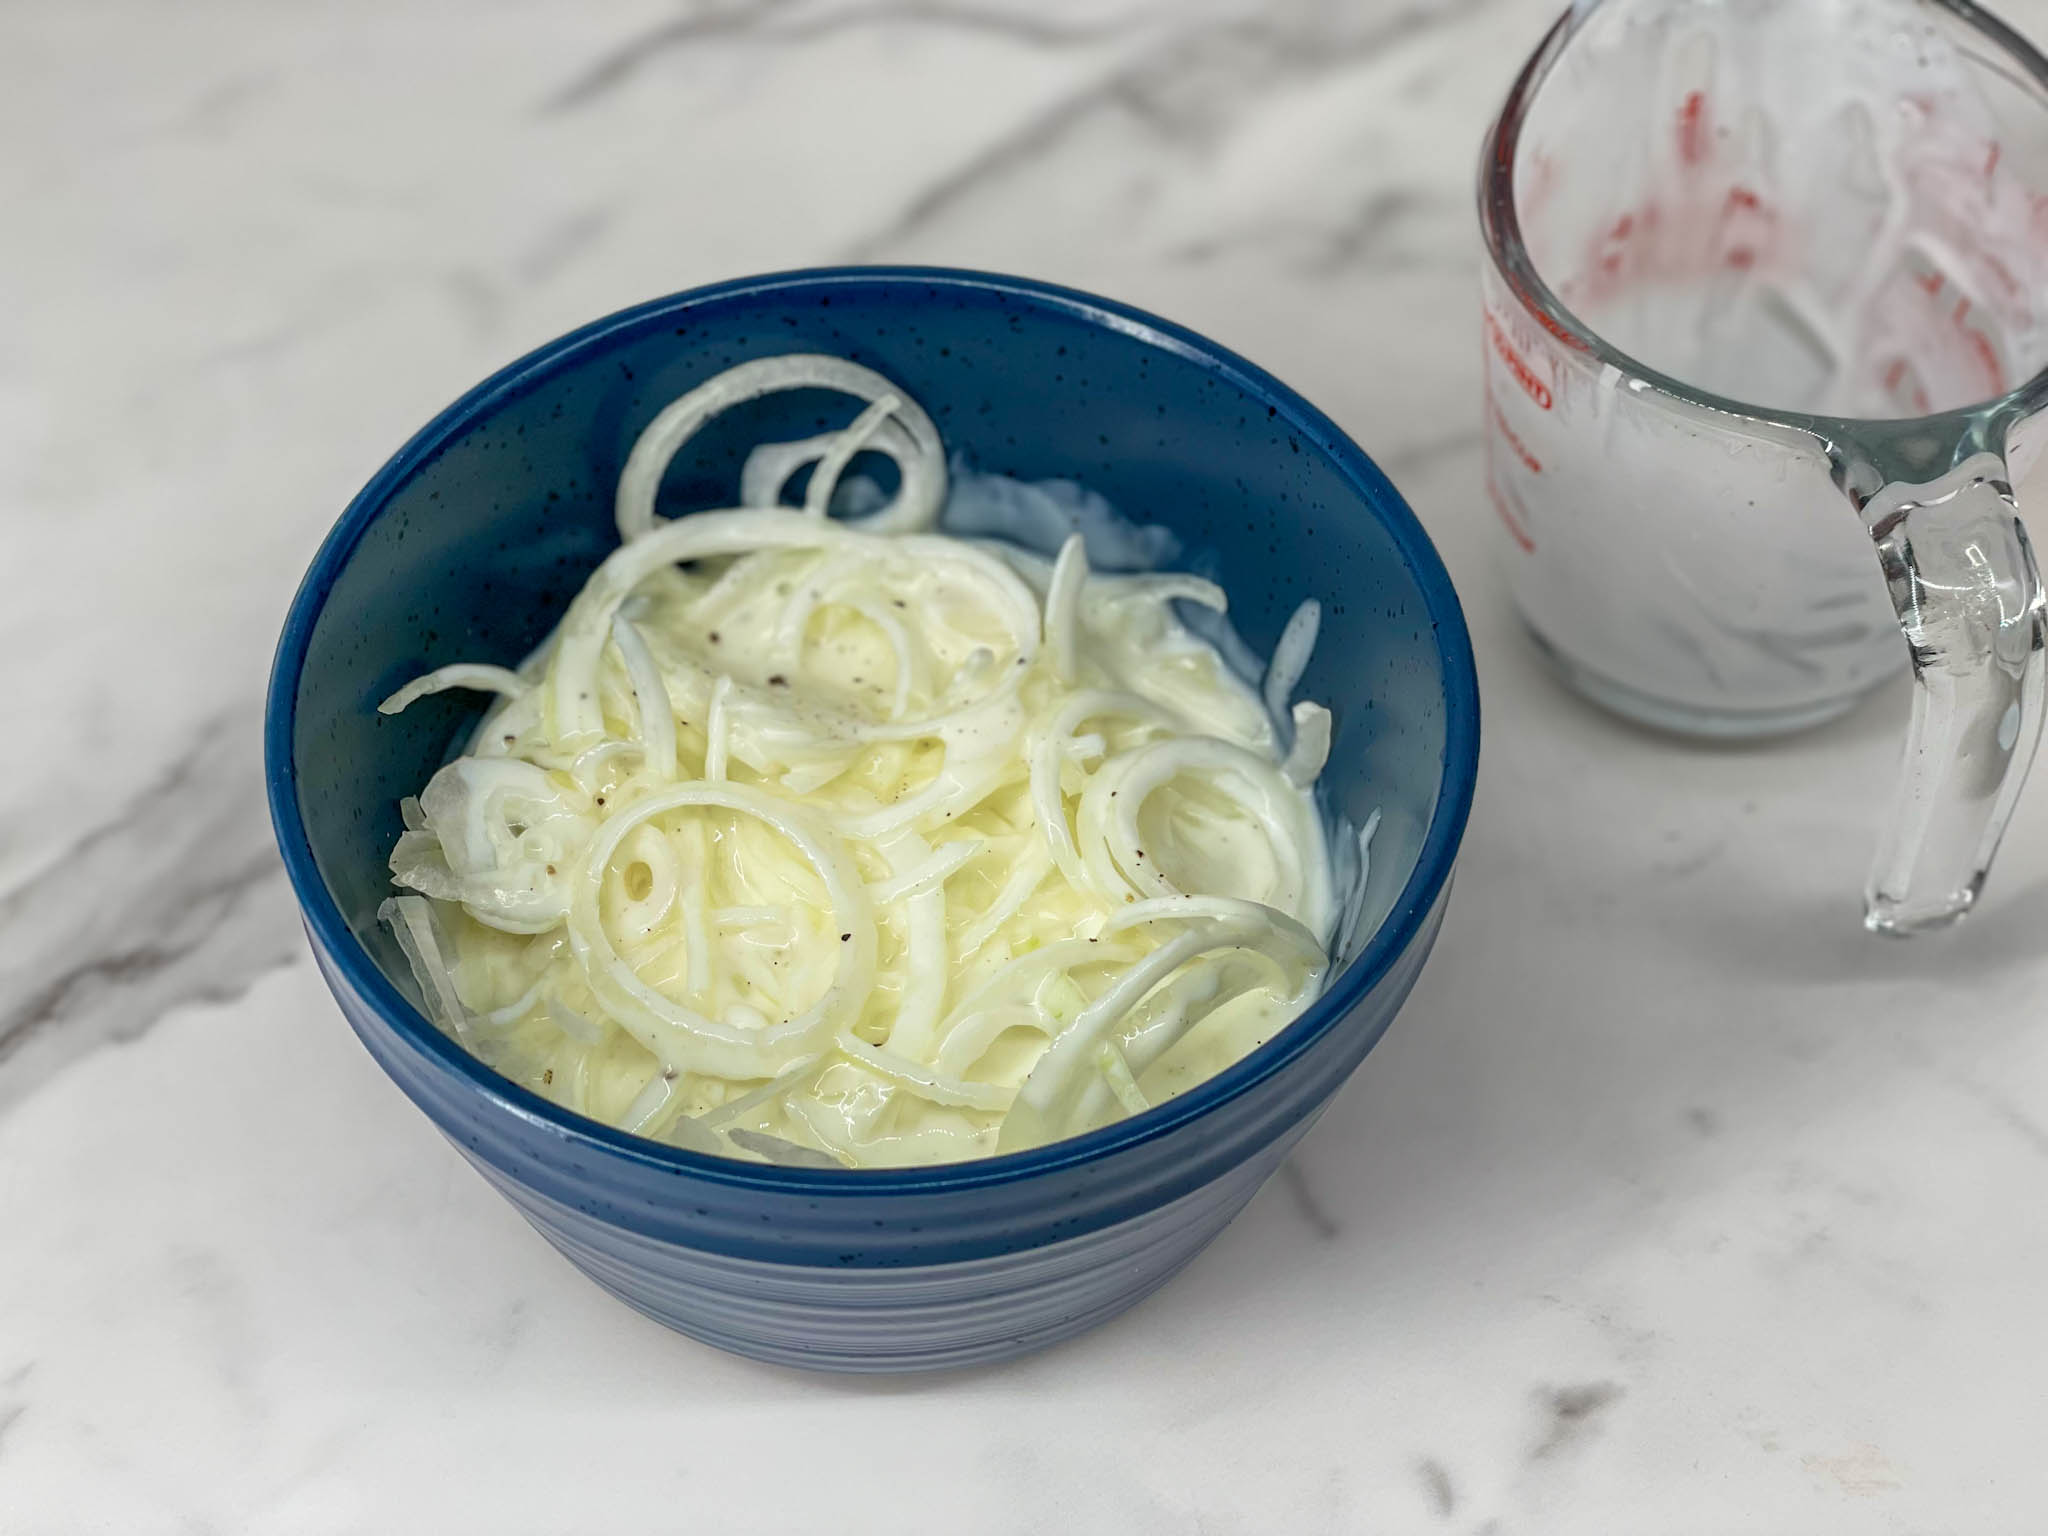 Onion slices marinating in buttermilk in a blue bowl.